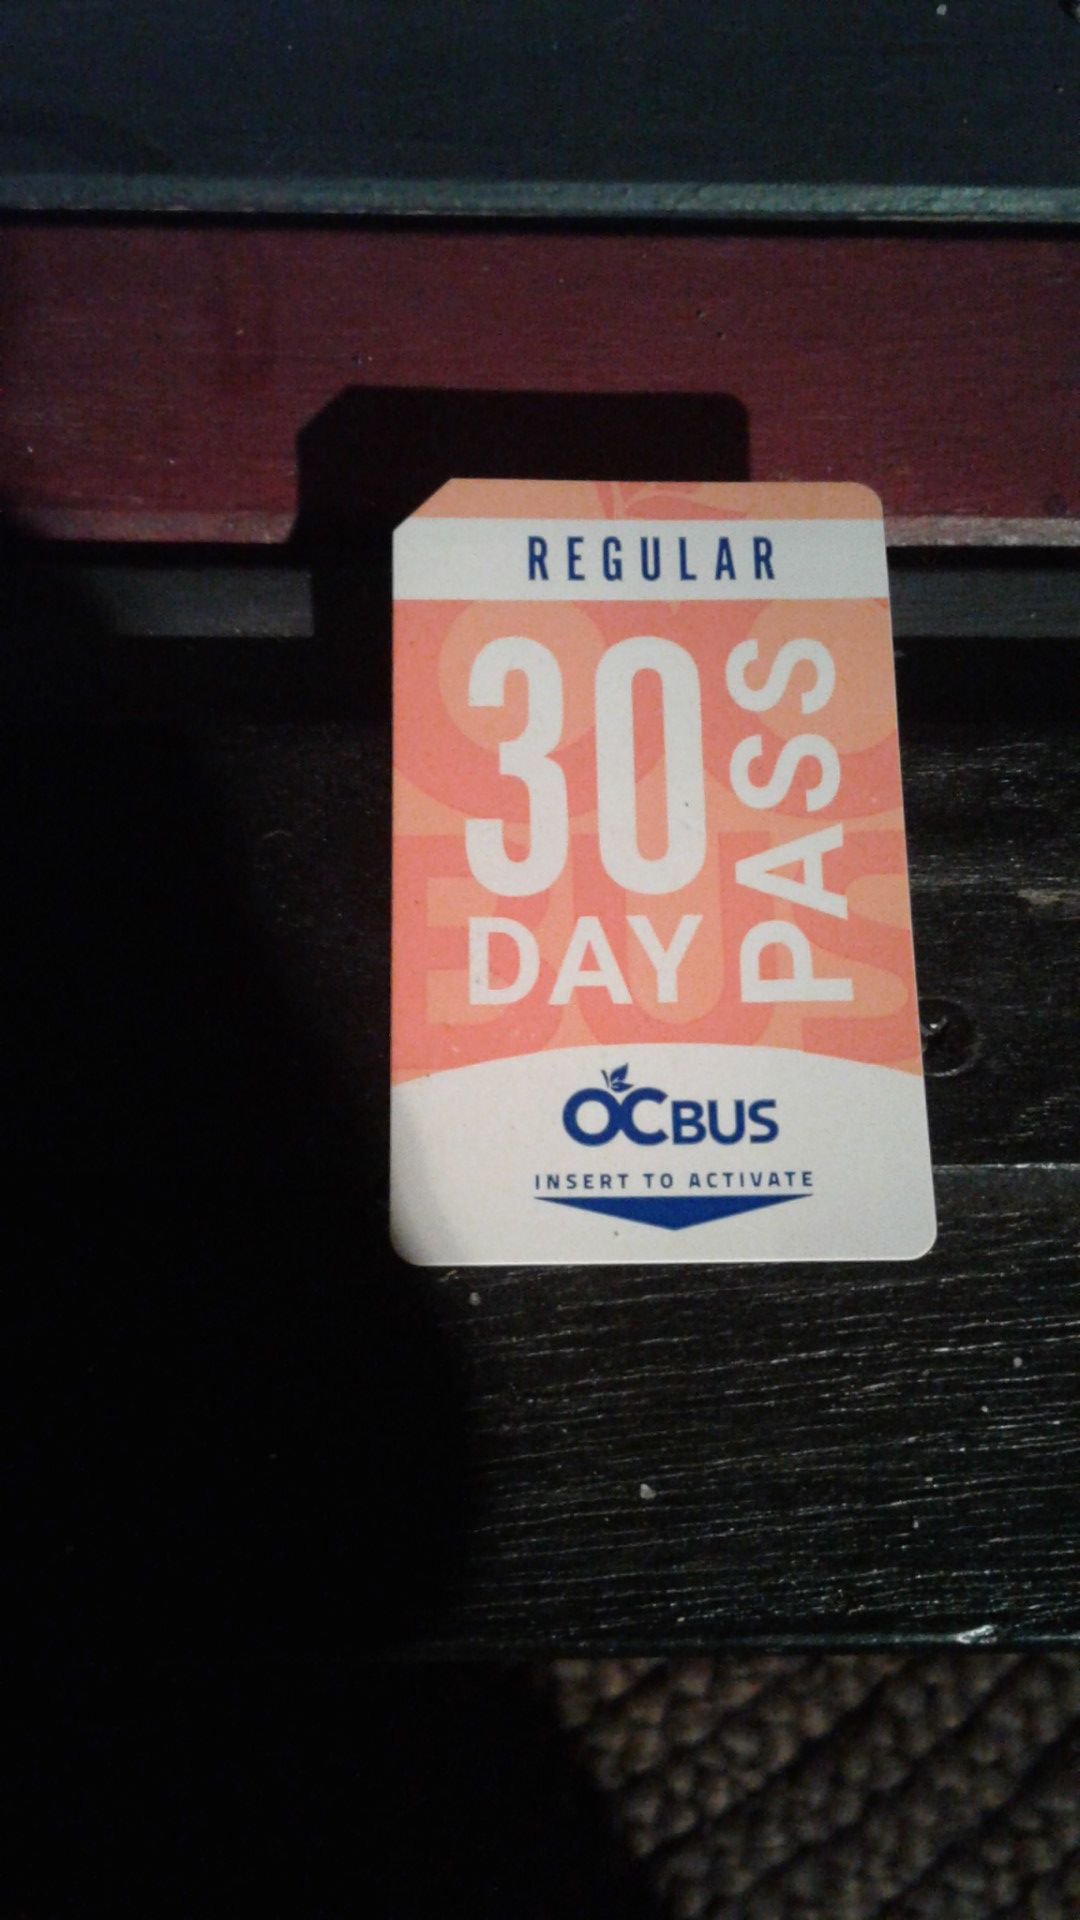 30 DAY OCTA Adult Bus Pass